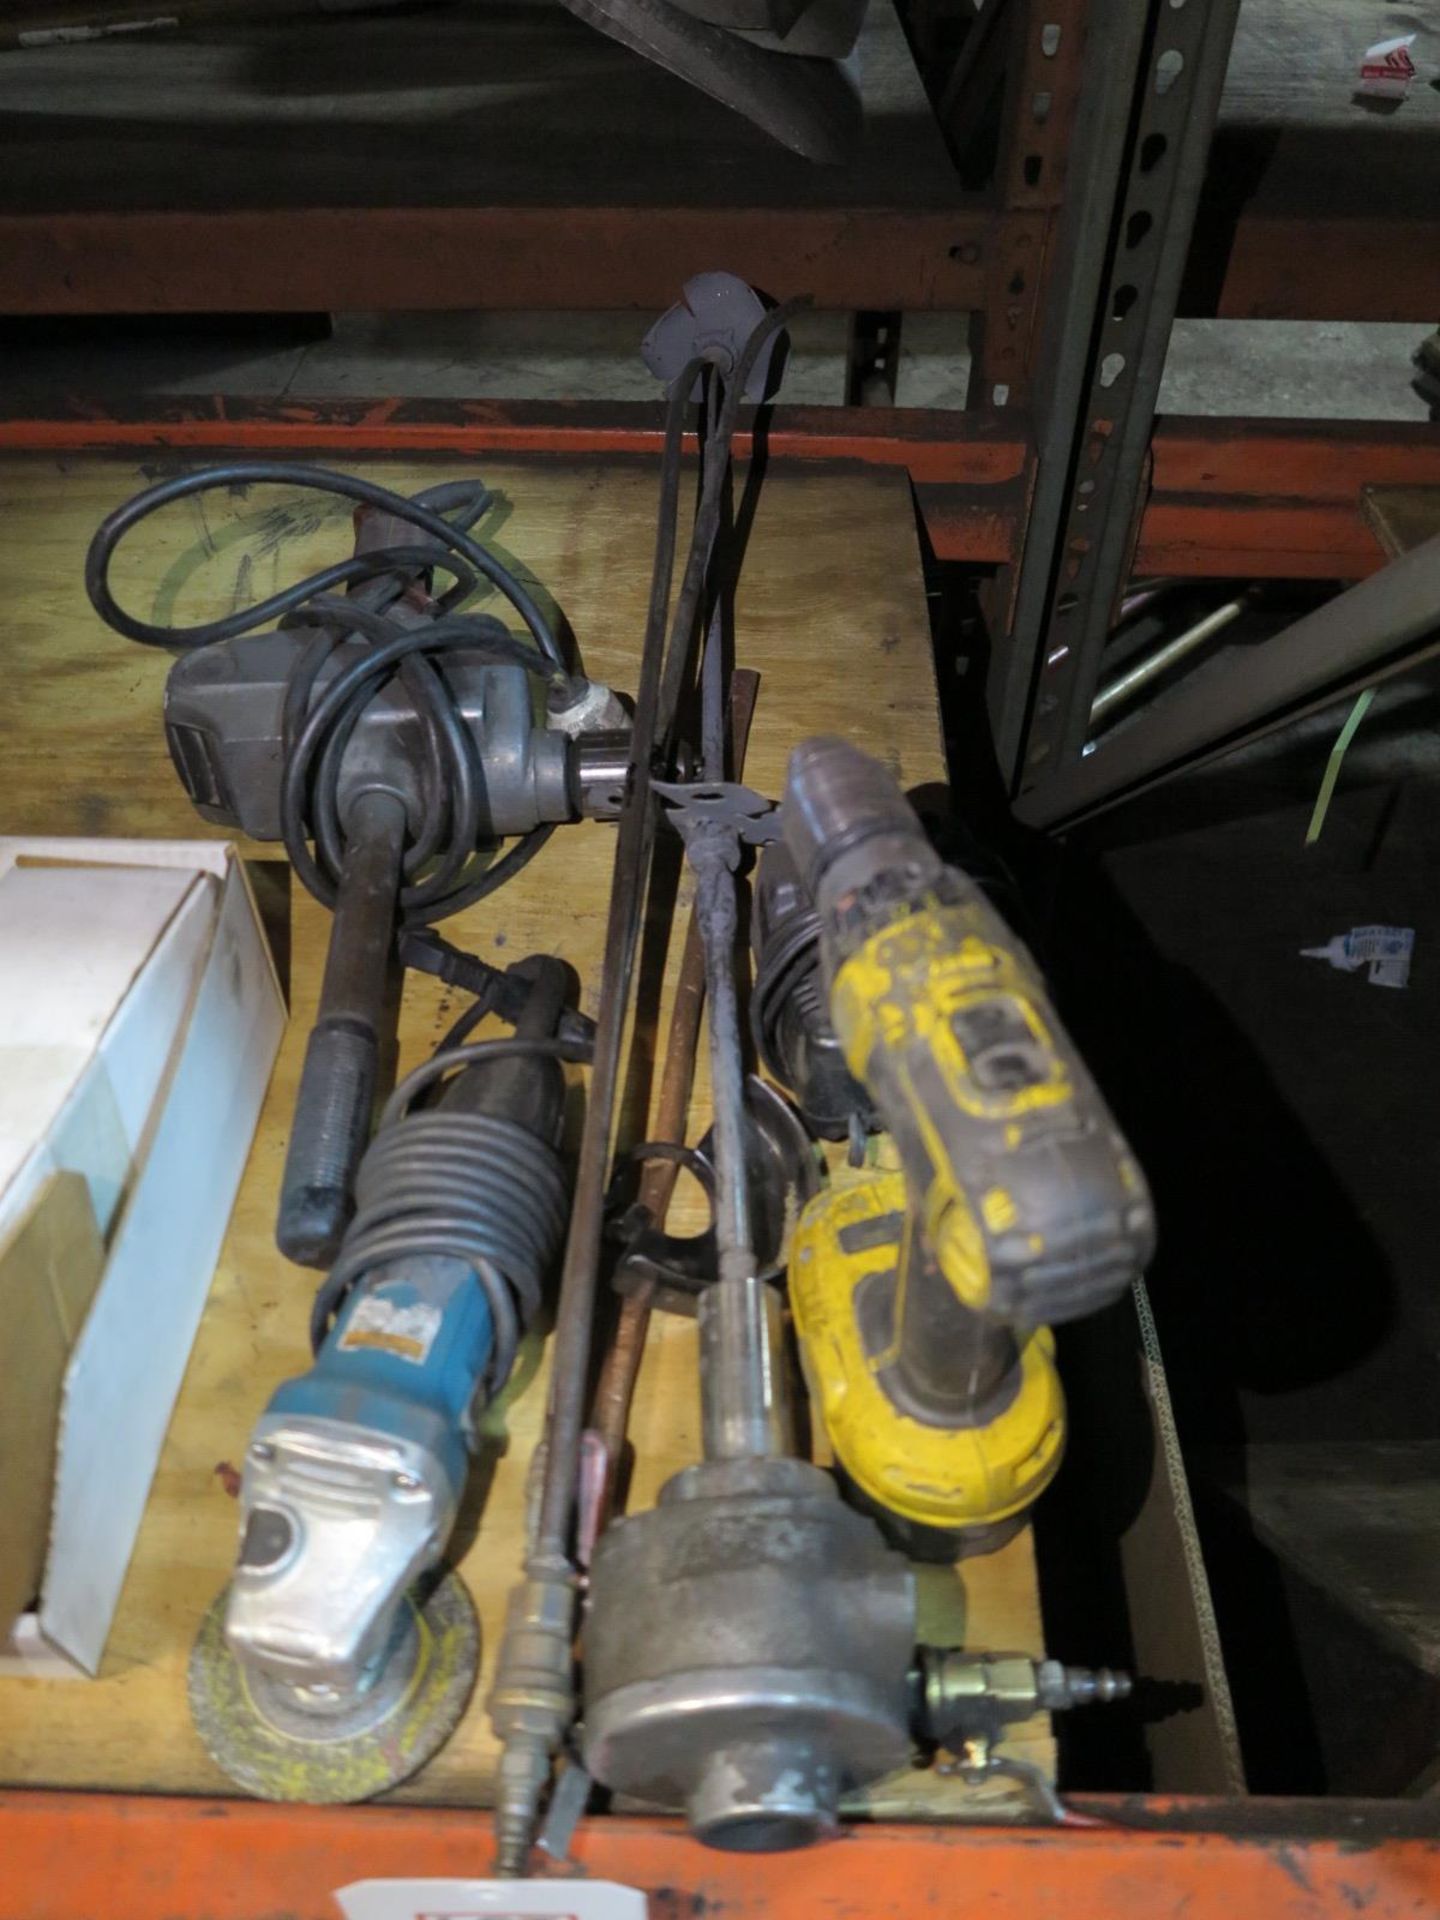 LOT - MISC PNEUMATIC AND ELECTRIC POWER TOOLS, TO INCLUDE: 1/2" DRILL MOTOR, DEWALT 18V CORDLESS